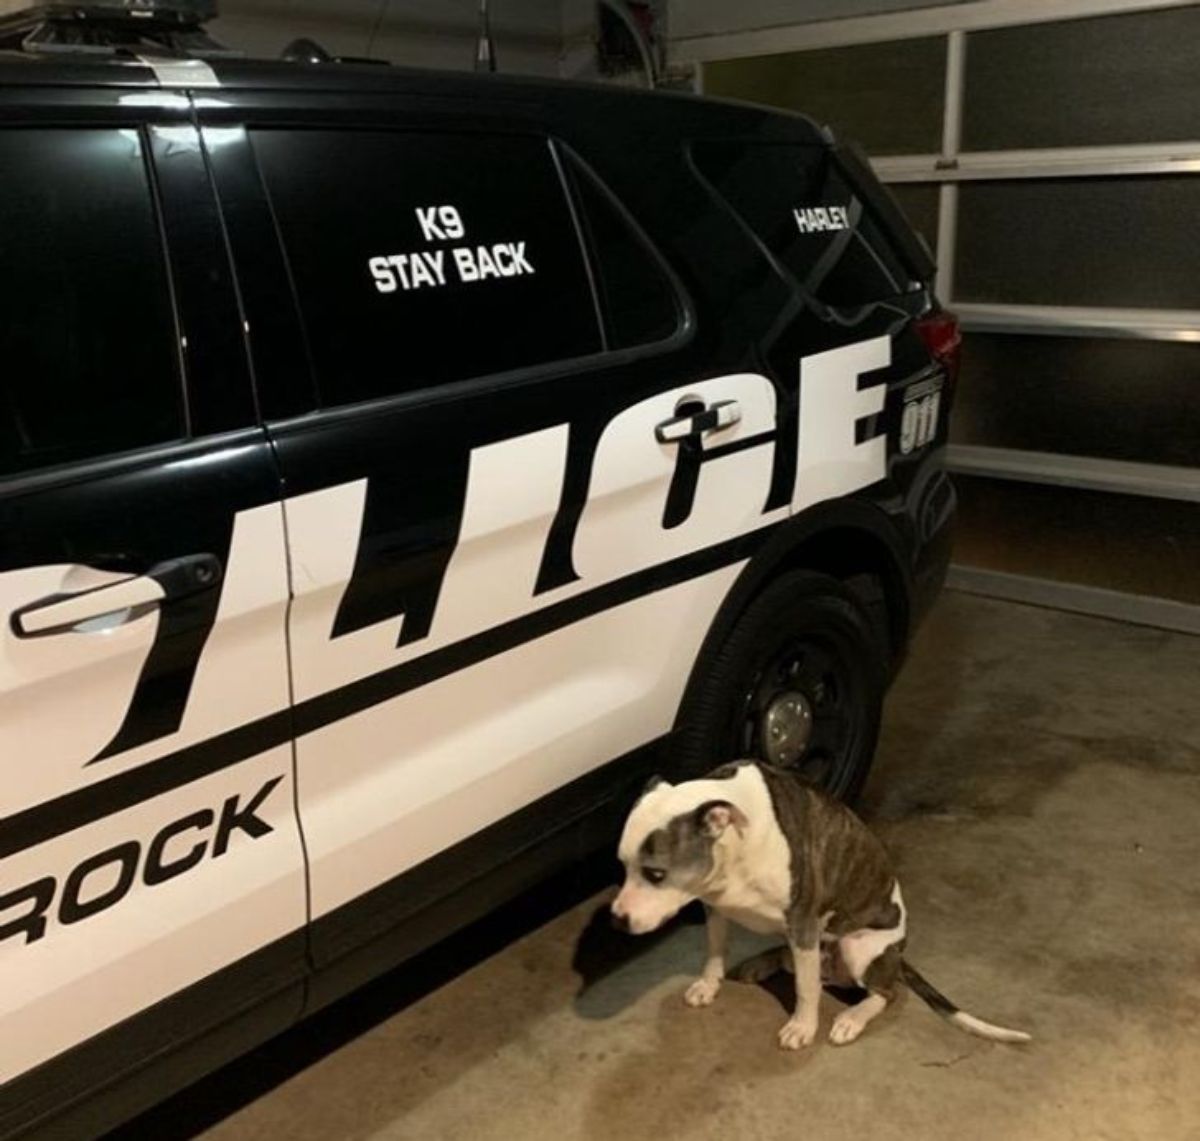 a black and white dog is on the ground next to a black and white police vehicle